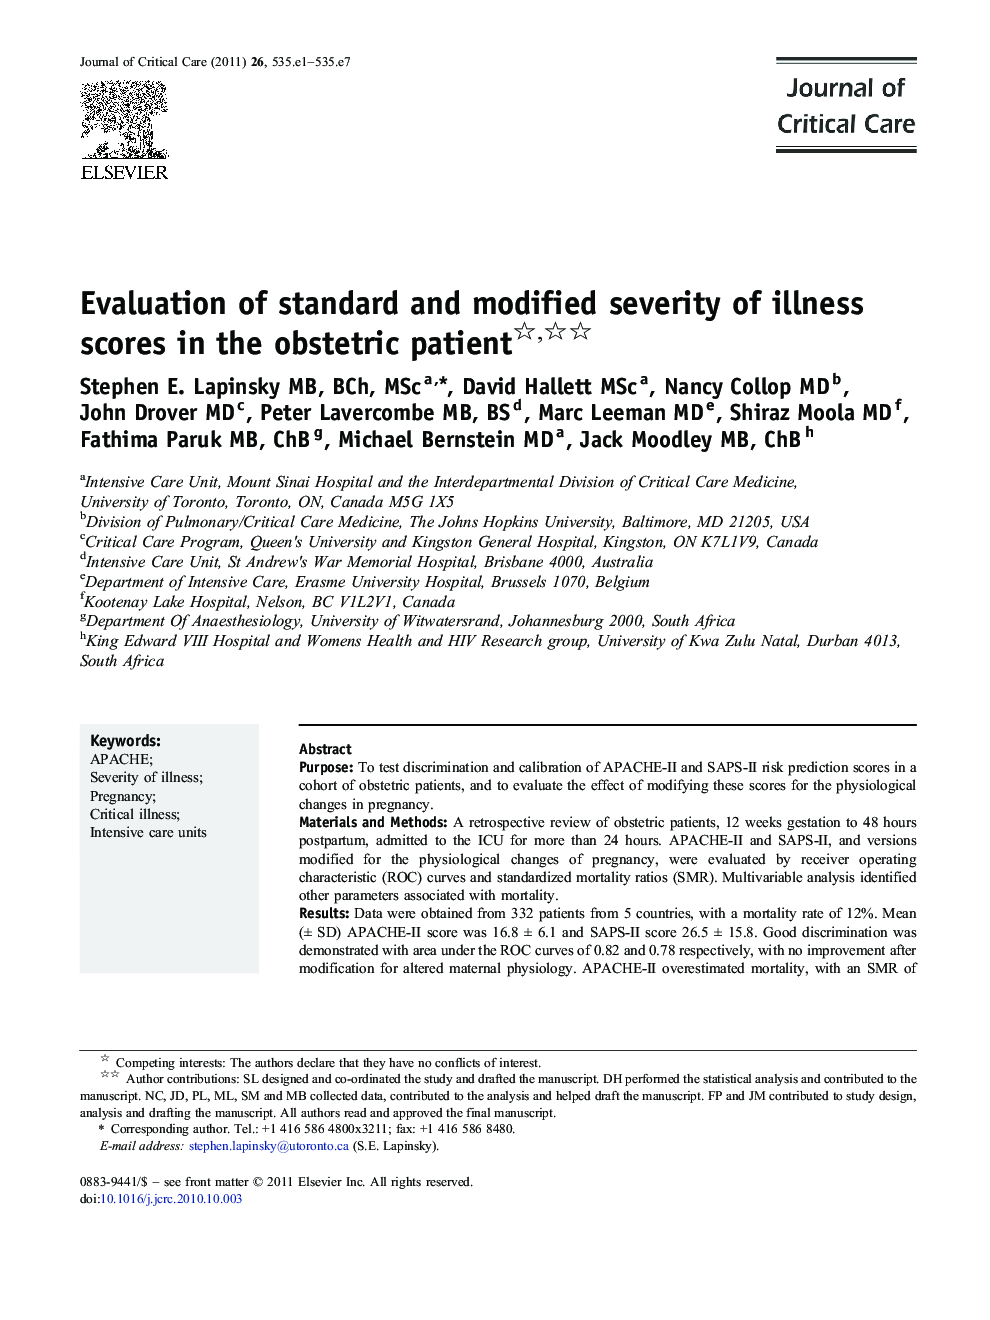 Evaluation of standard and modified severity of illness scores in the obstetric patient